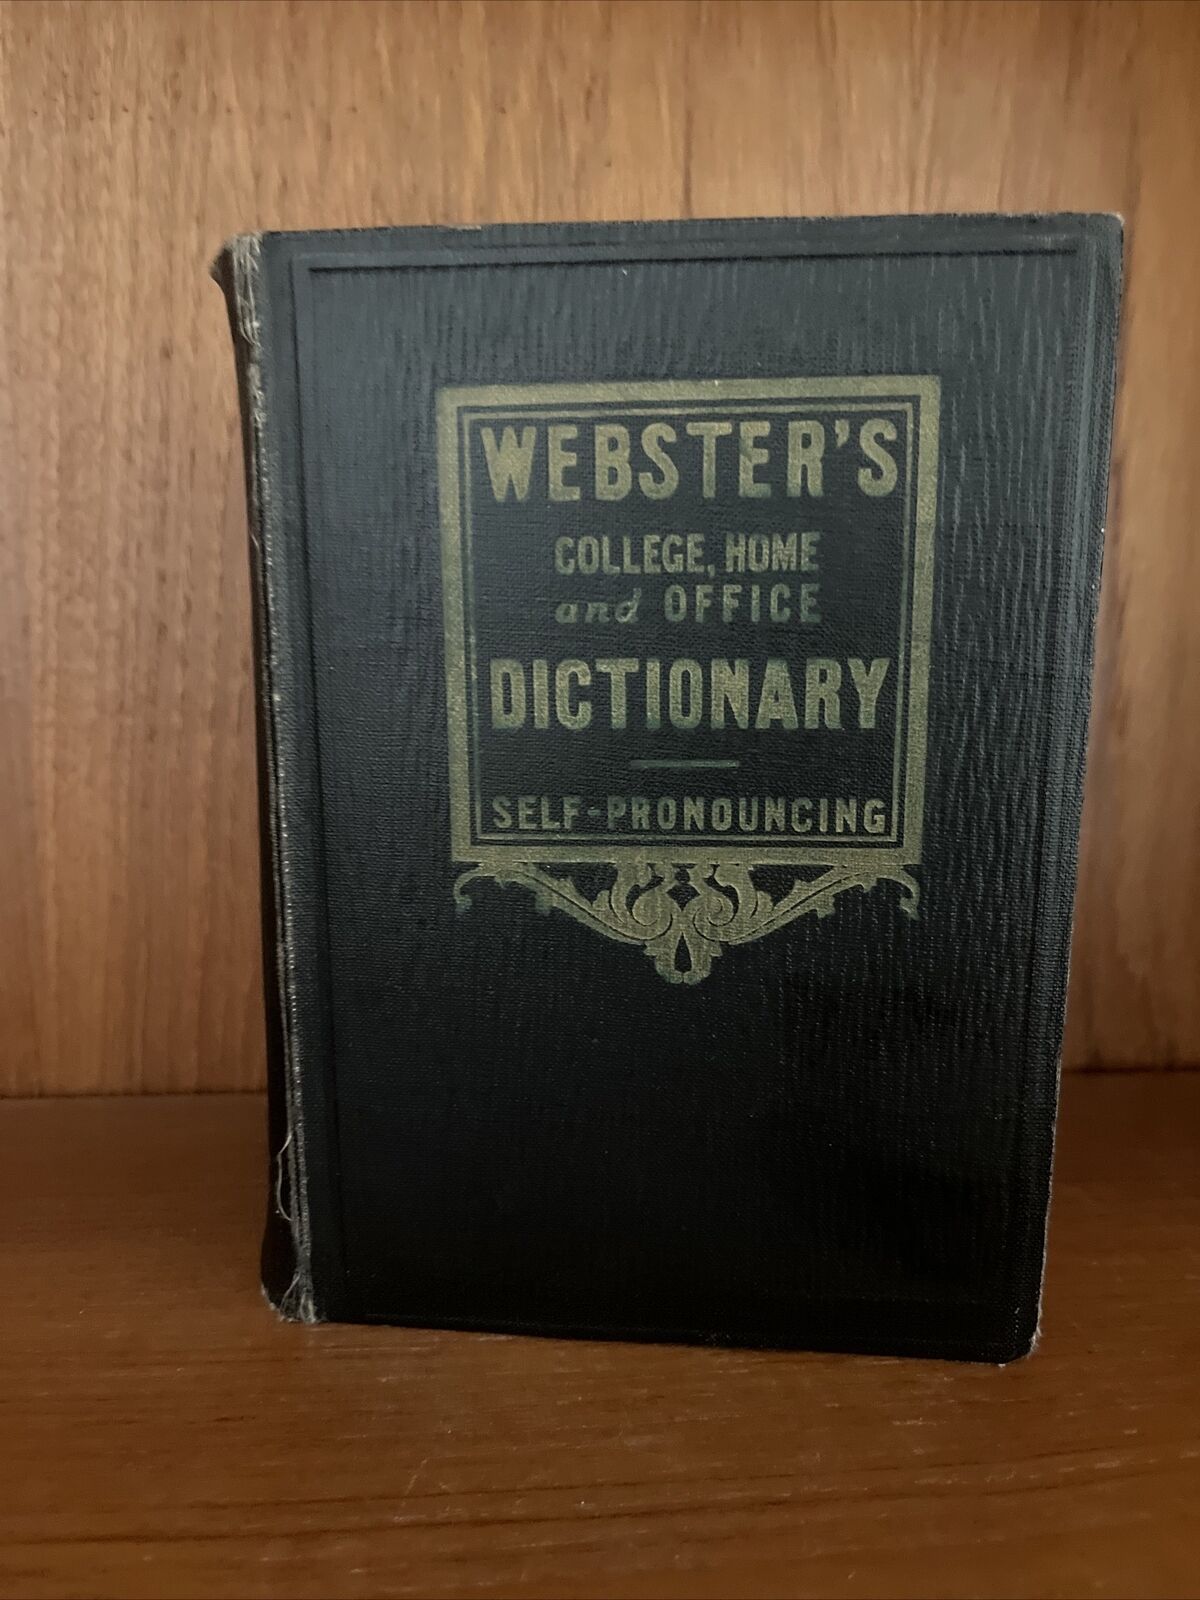 Webster\'s College, Home and Office Dictionary: Self-Pronouncing. H.T. Peck, ed.